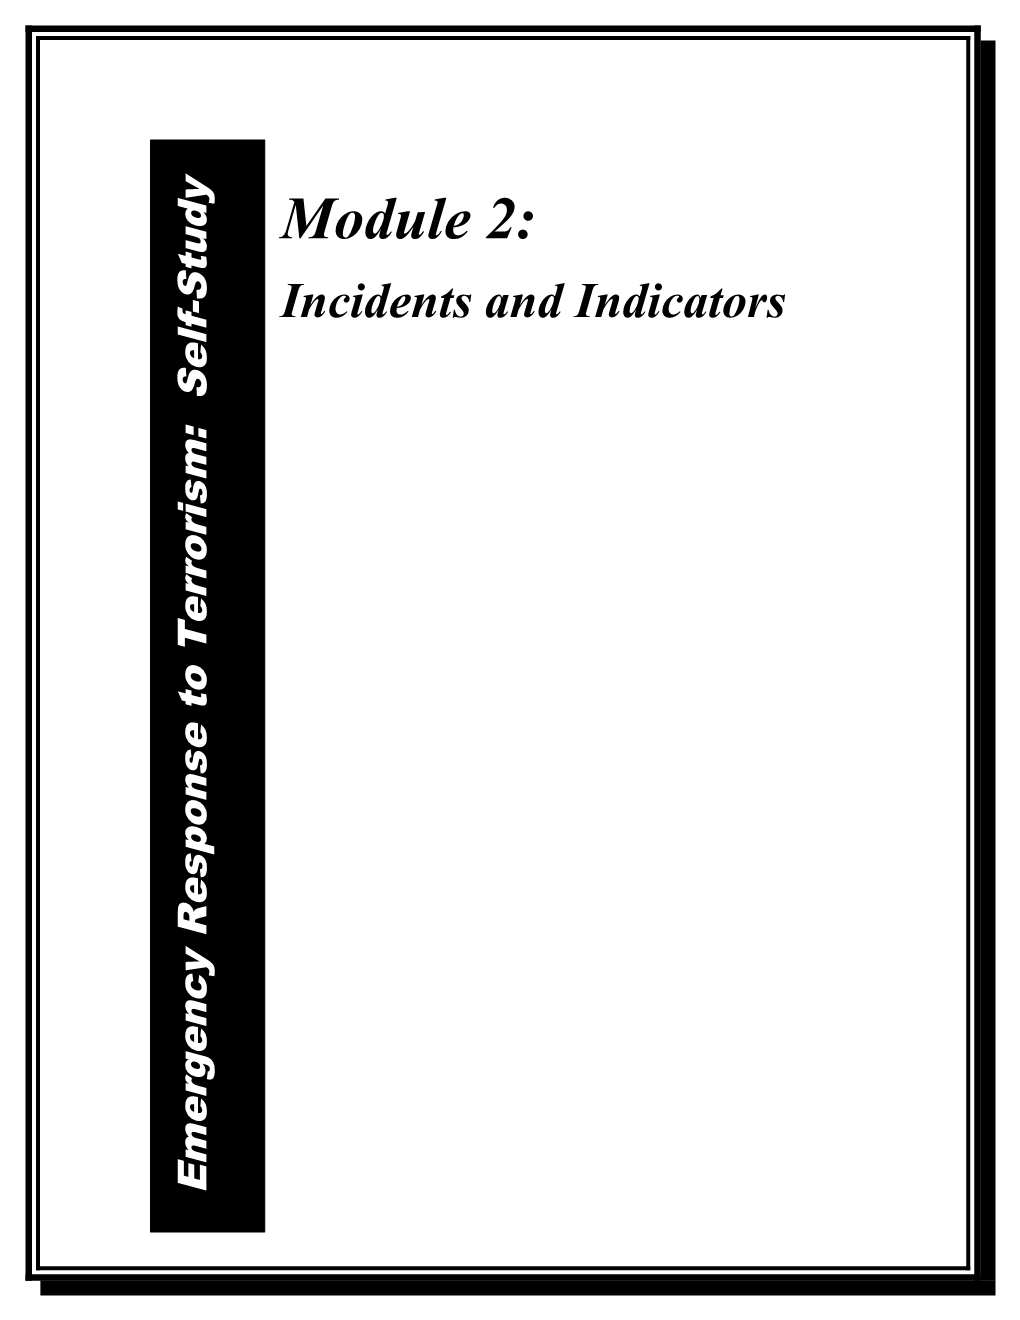 Module 2: Incidents And Indicators